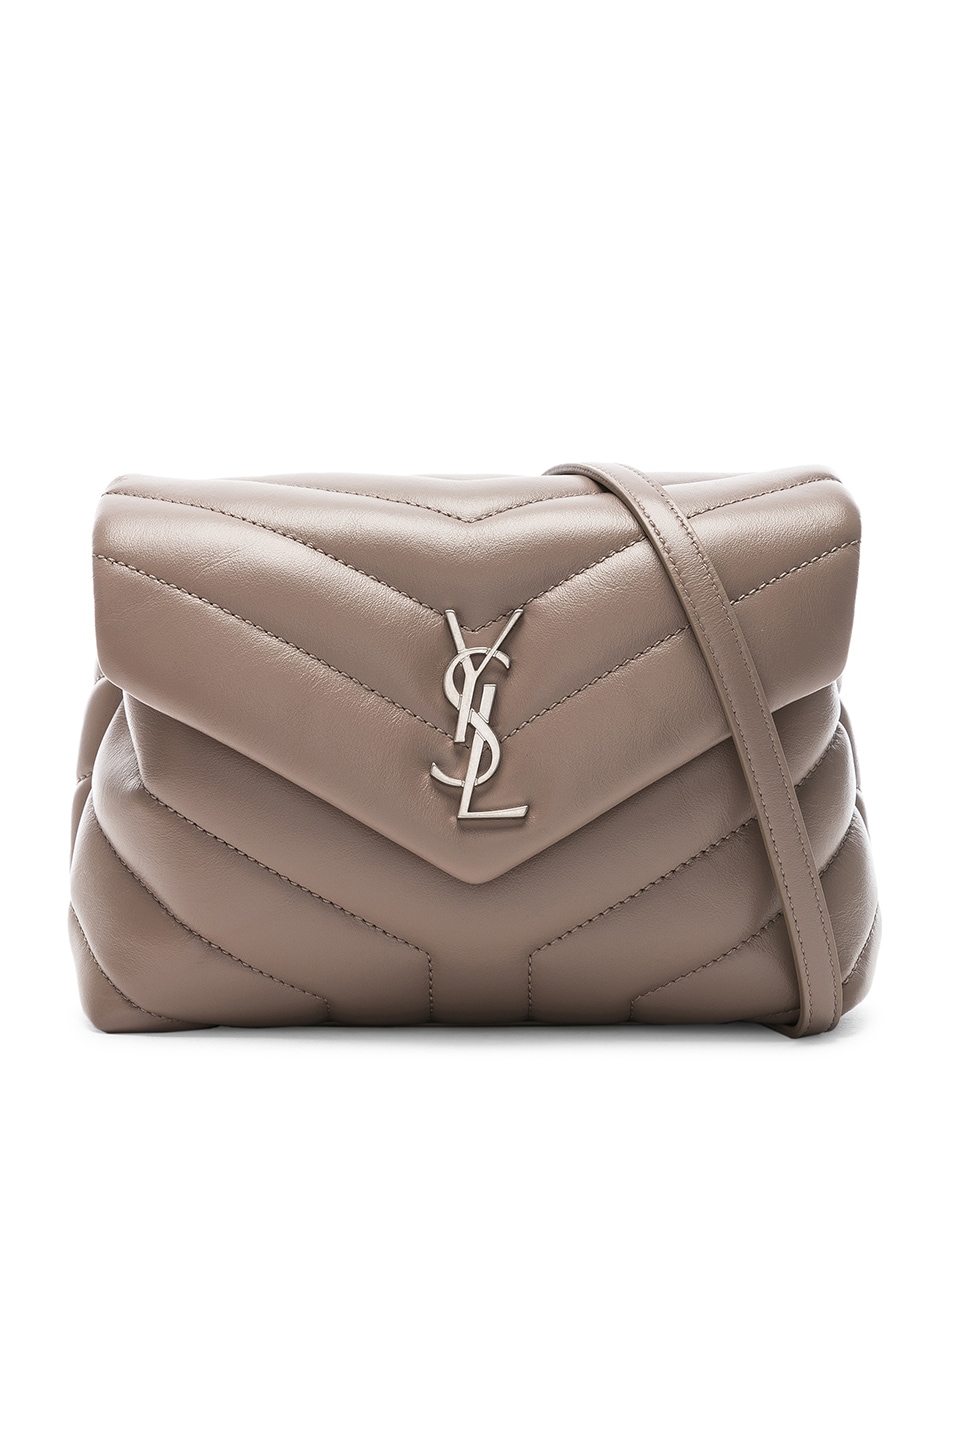 Image 1 of Saint Laurent Toy Supple Monogramme Loulou Strap Bag in Taupe Sand